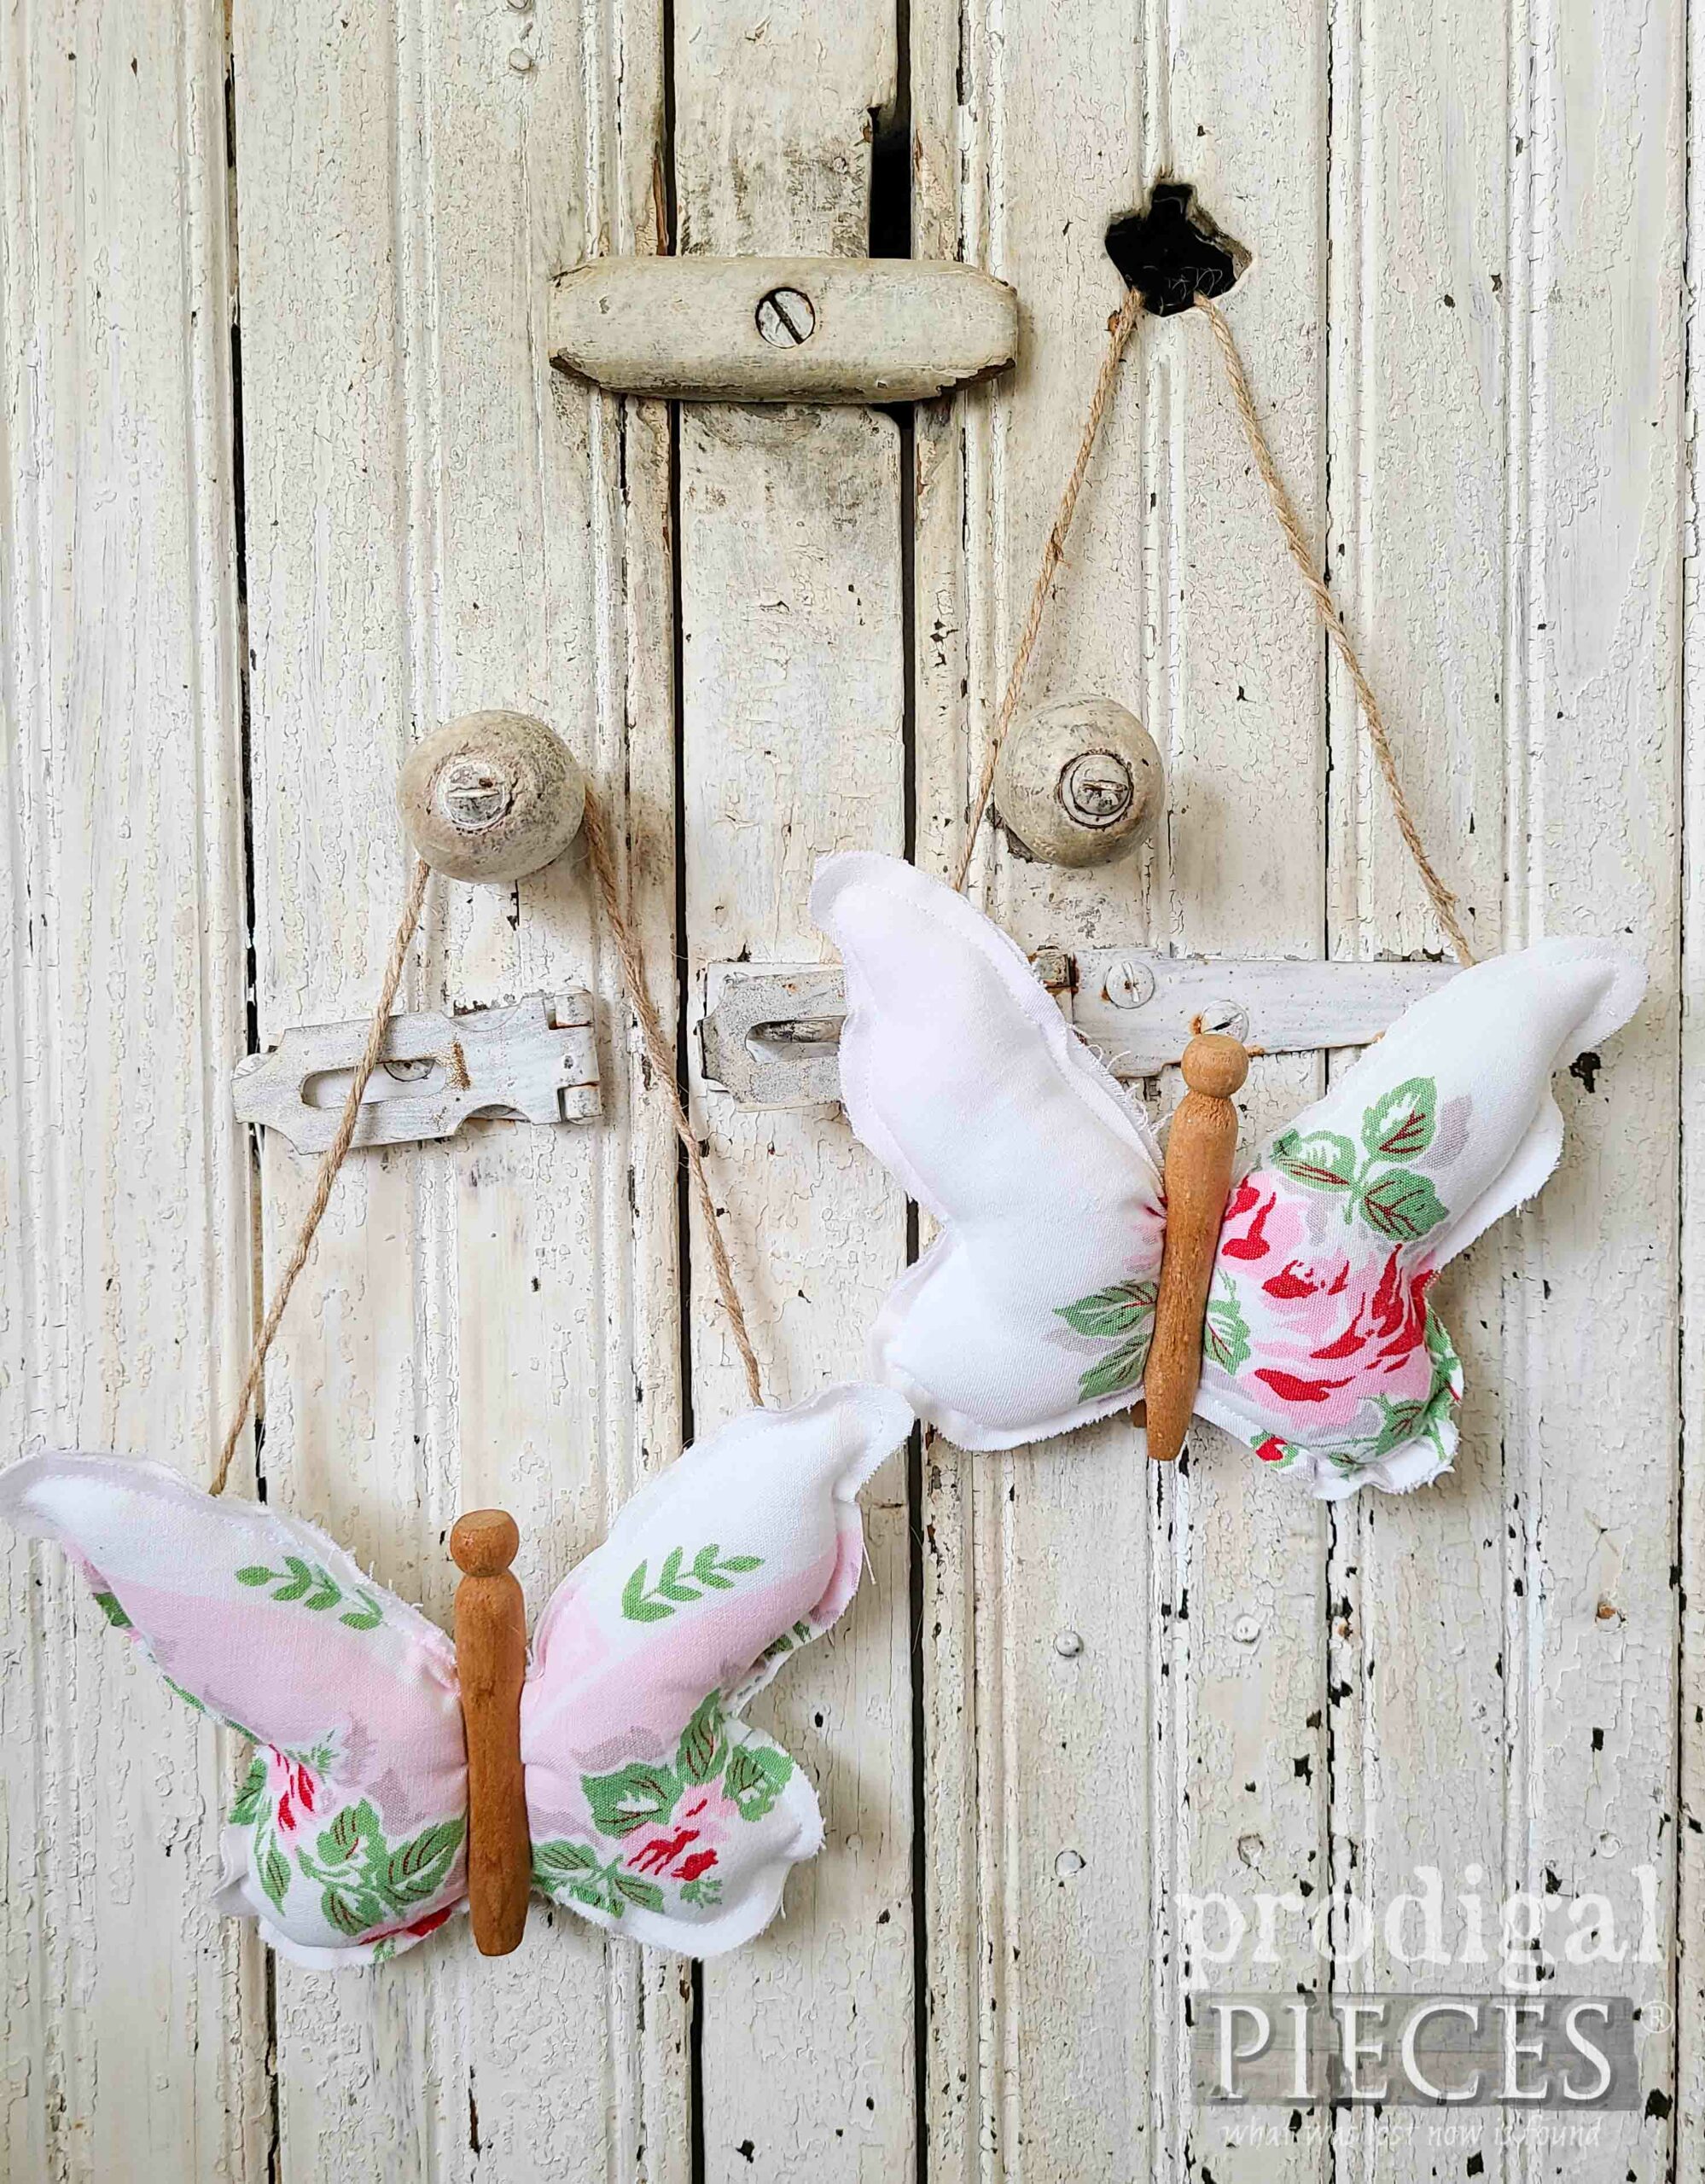 Pink Rose Refashioned Tablecloth Clothespin Butterflies by Larissa of Prodigal Pieces | prodigalpieces.com #prodigalpieces #vintage #handmade #diy